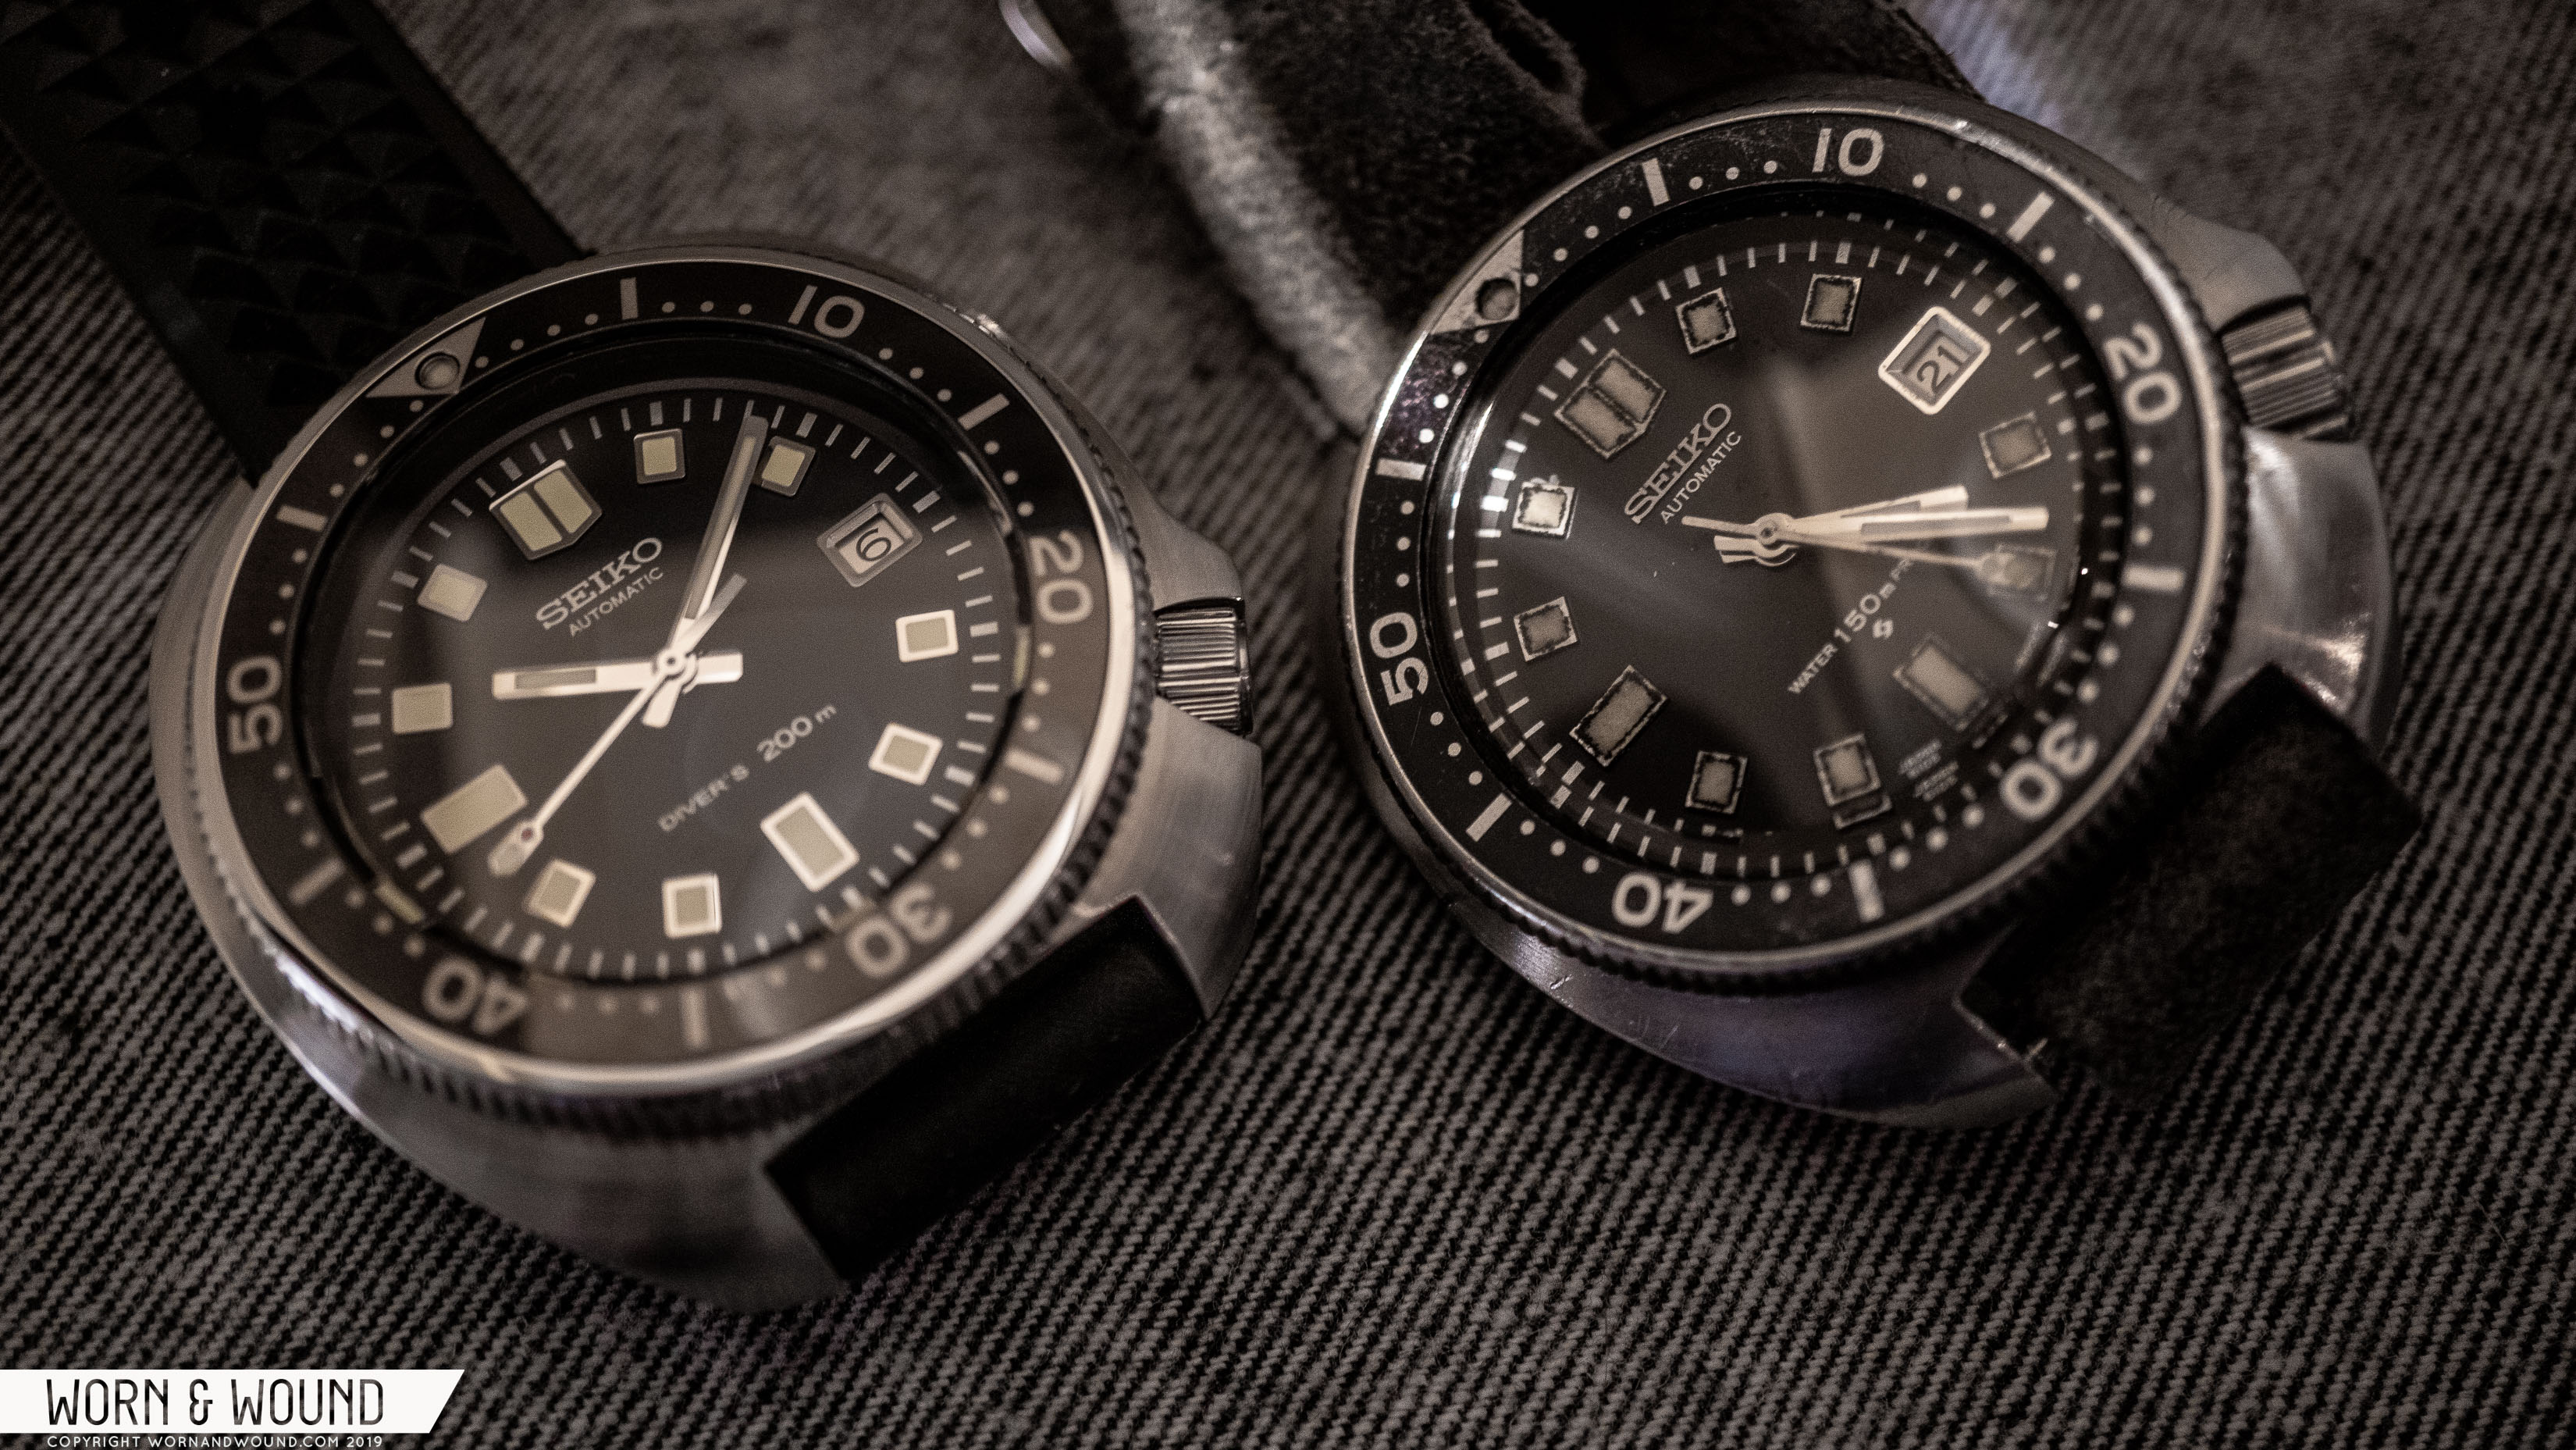 Baselworld 2019: Gallery of the Seiko Ref. SLA033, the Reissue of the Iconic 6105 Diver